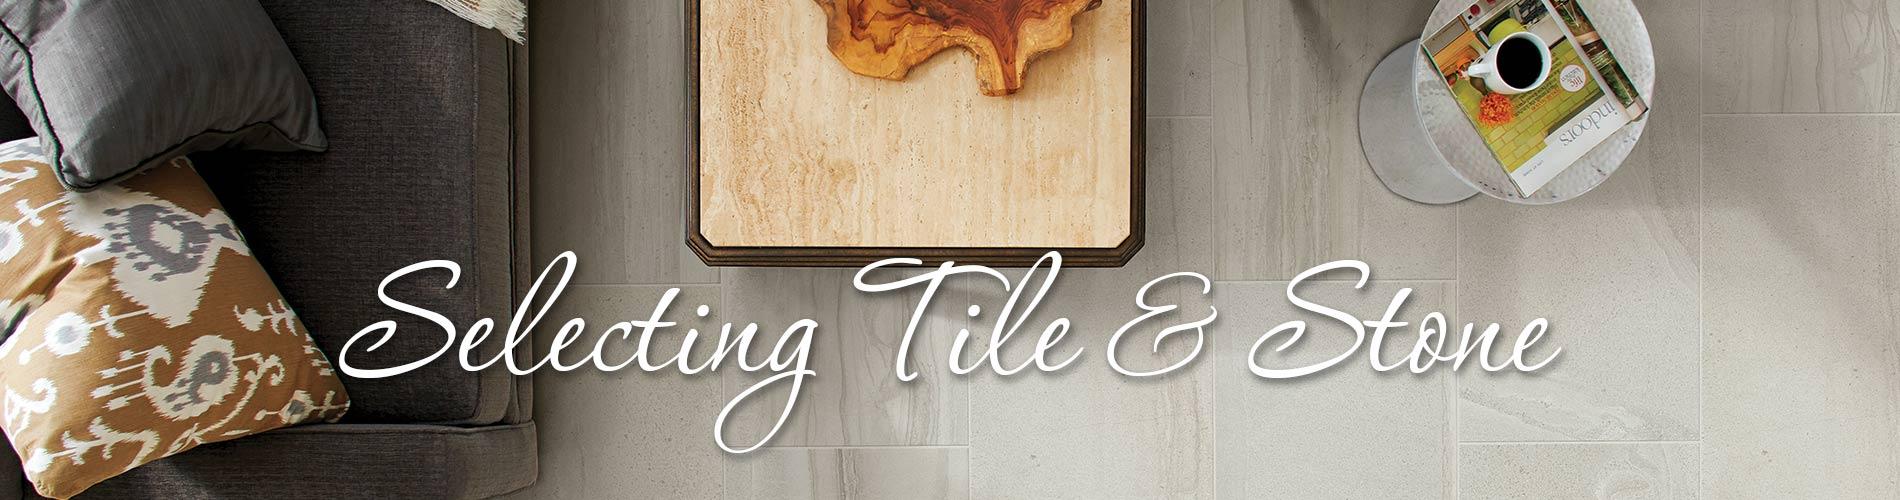 Selecting Tile and Stone